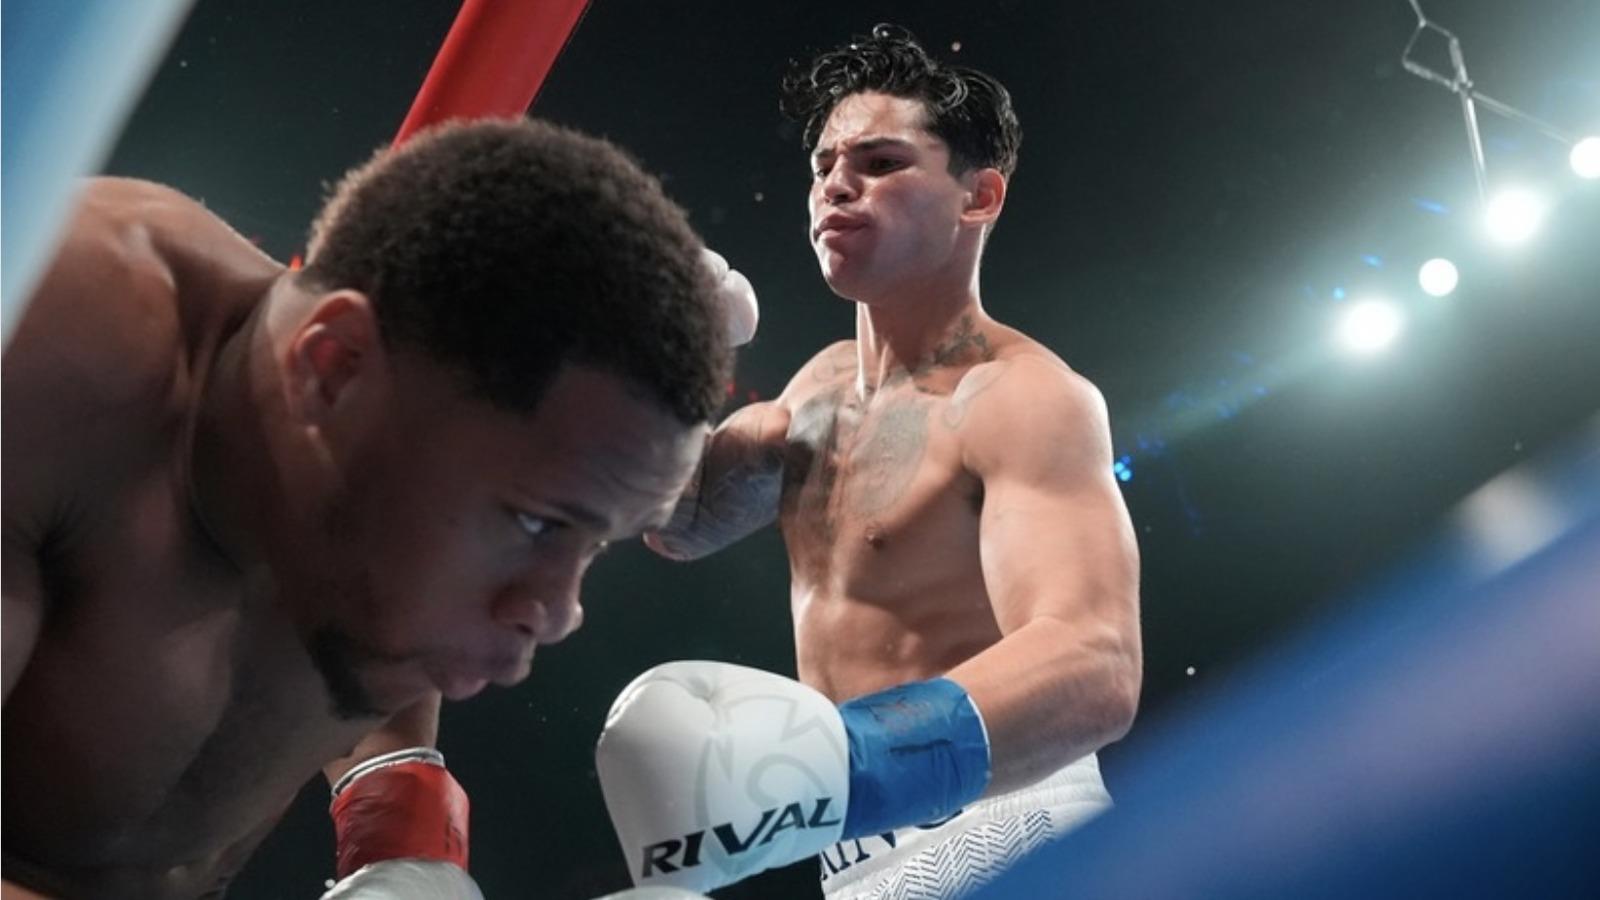 Ryan Garcia and his legal team seek a compromise with the boxing commission amid potential sanction